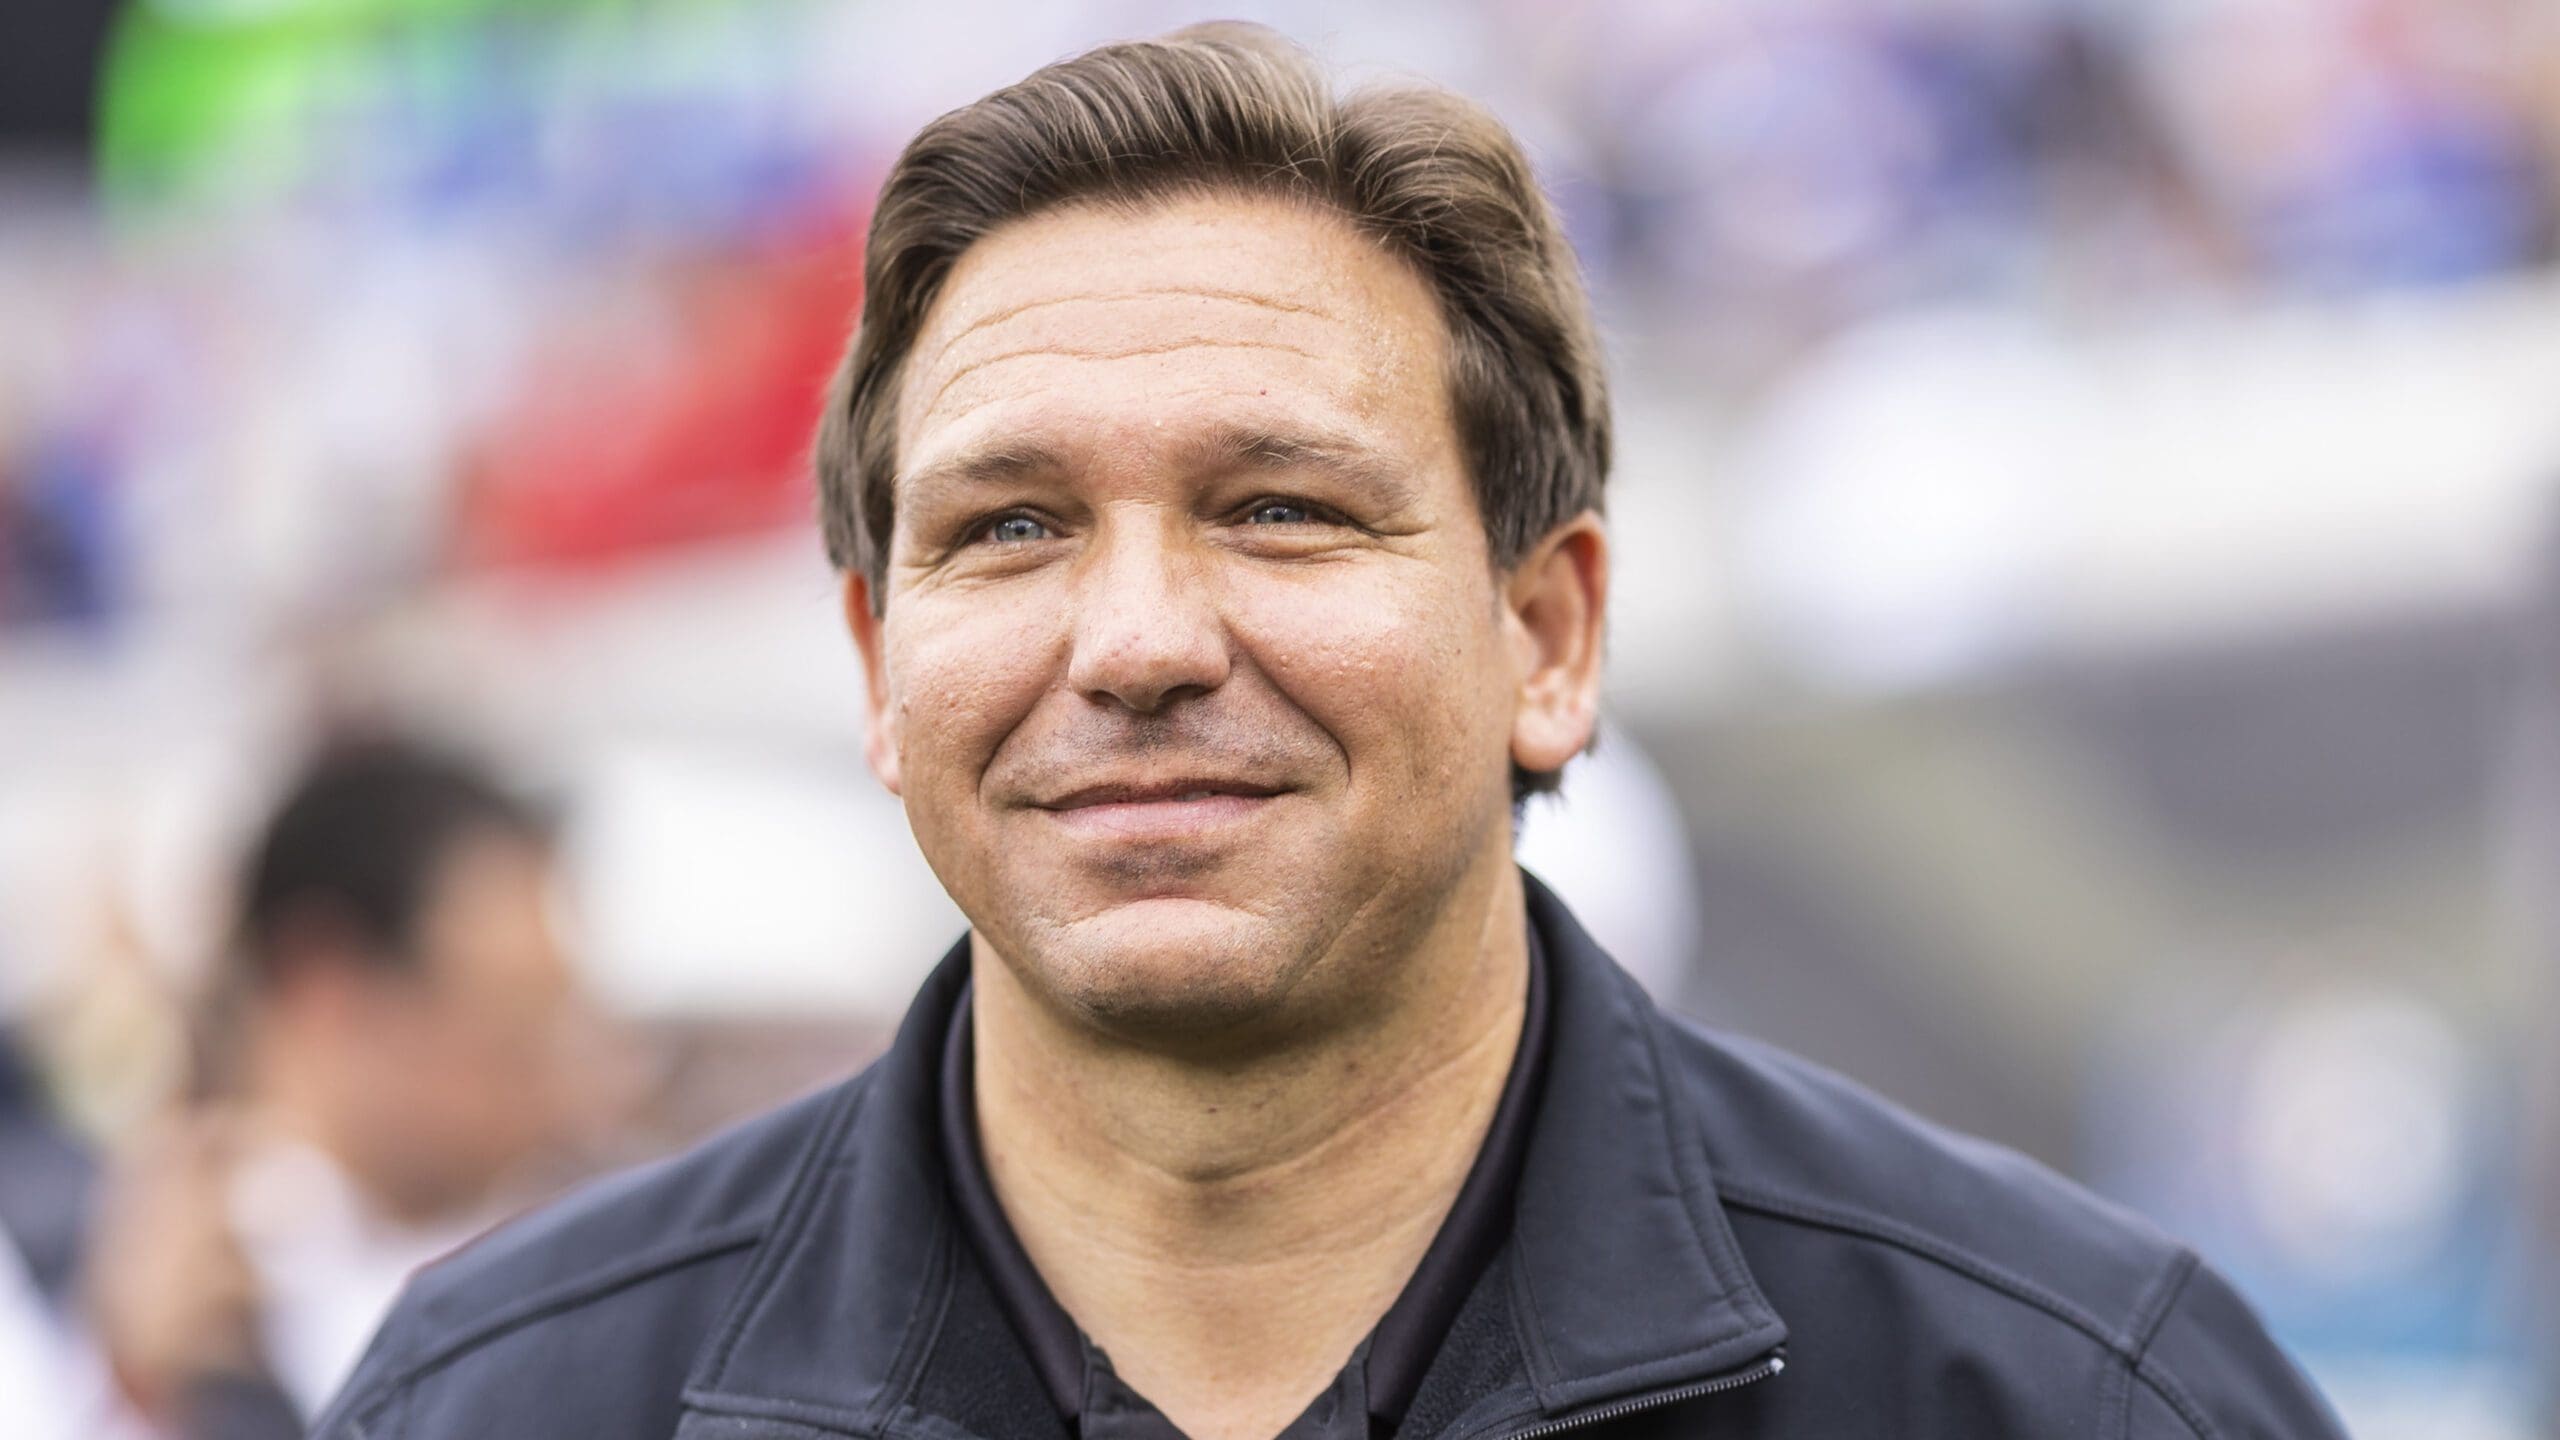 desantis-responds-to-opponents-who-claim-he-doesn’t-have-enough-‘personality’-to-be-president